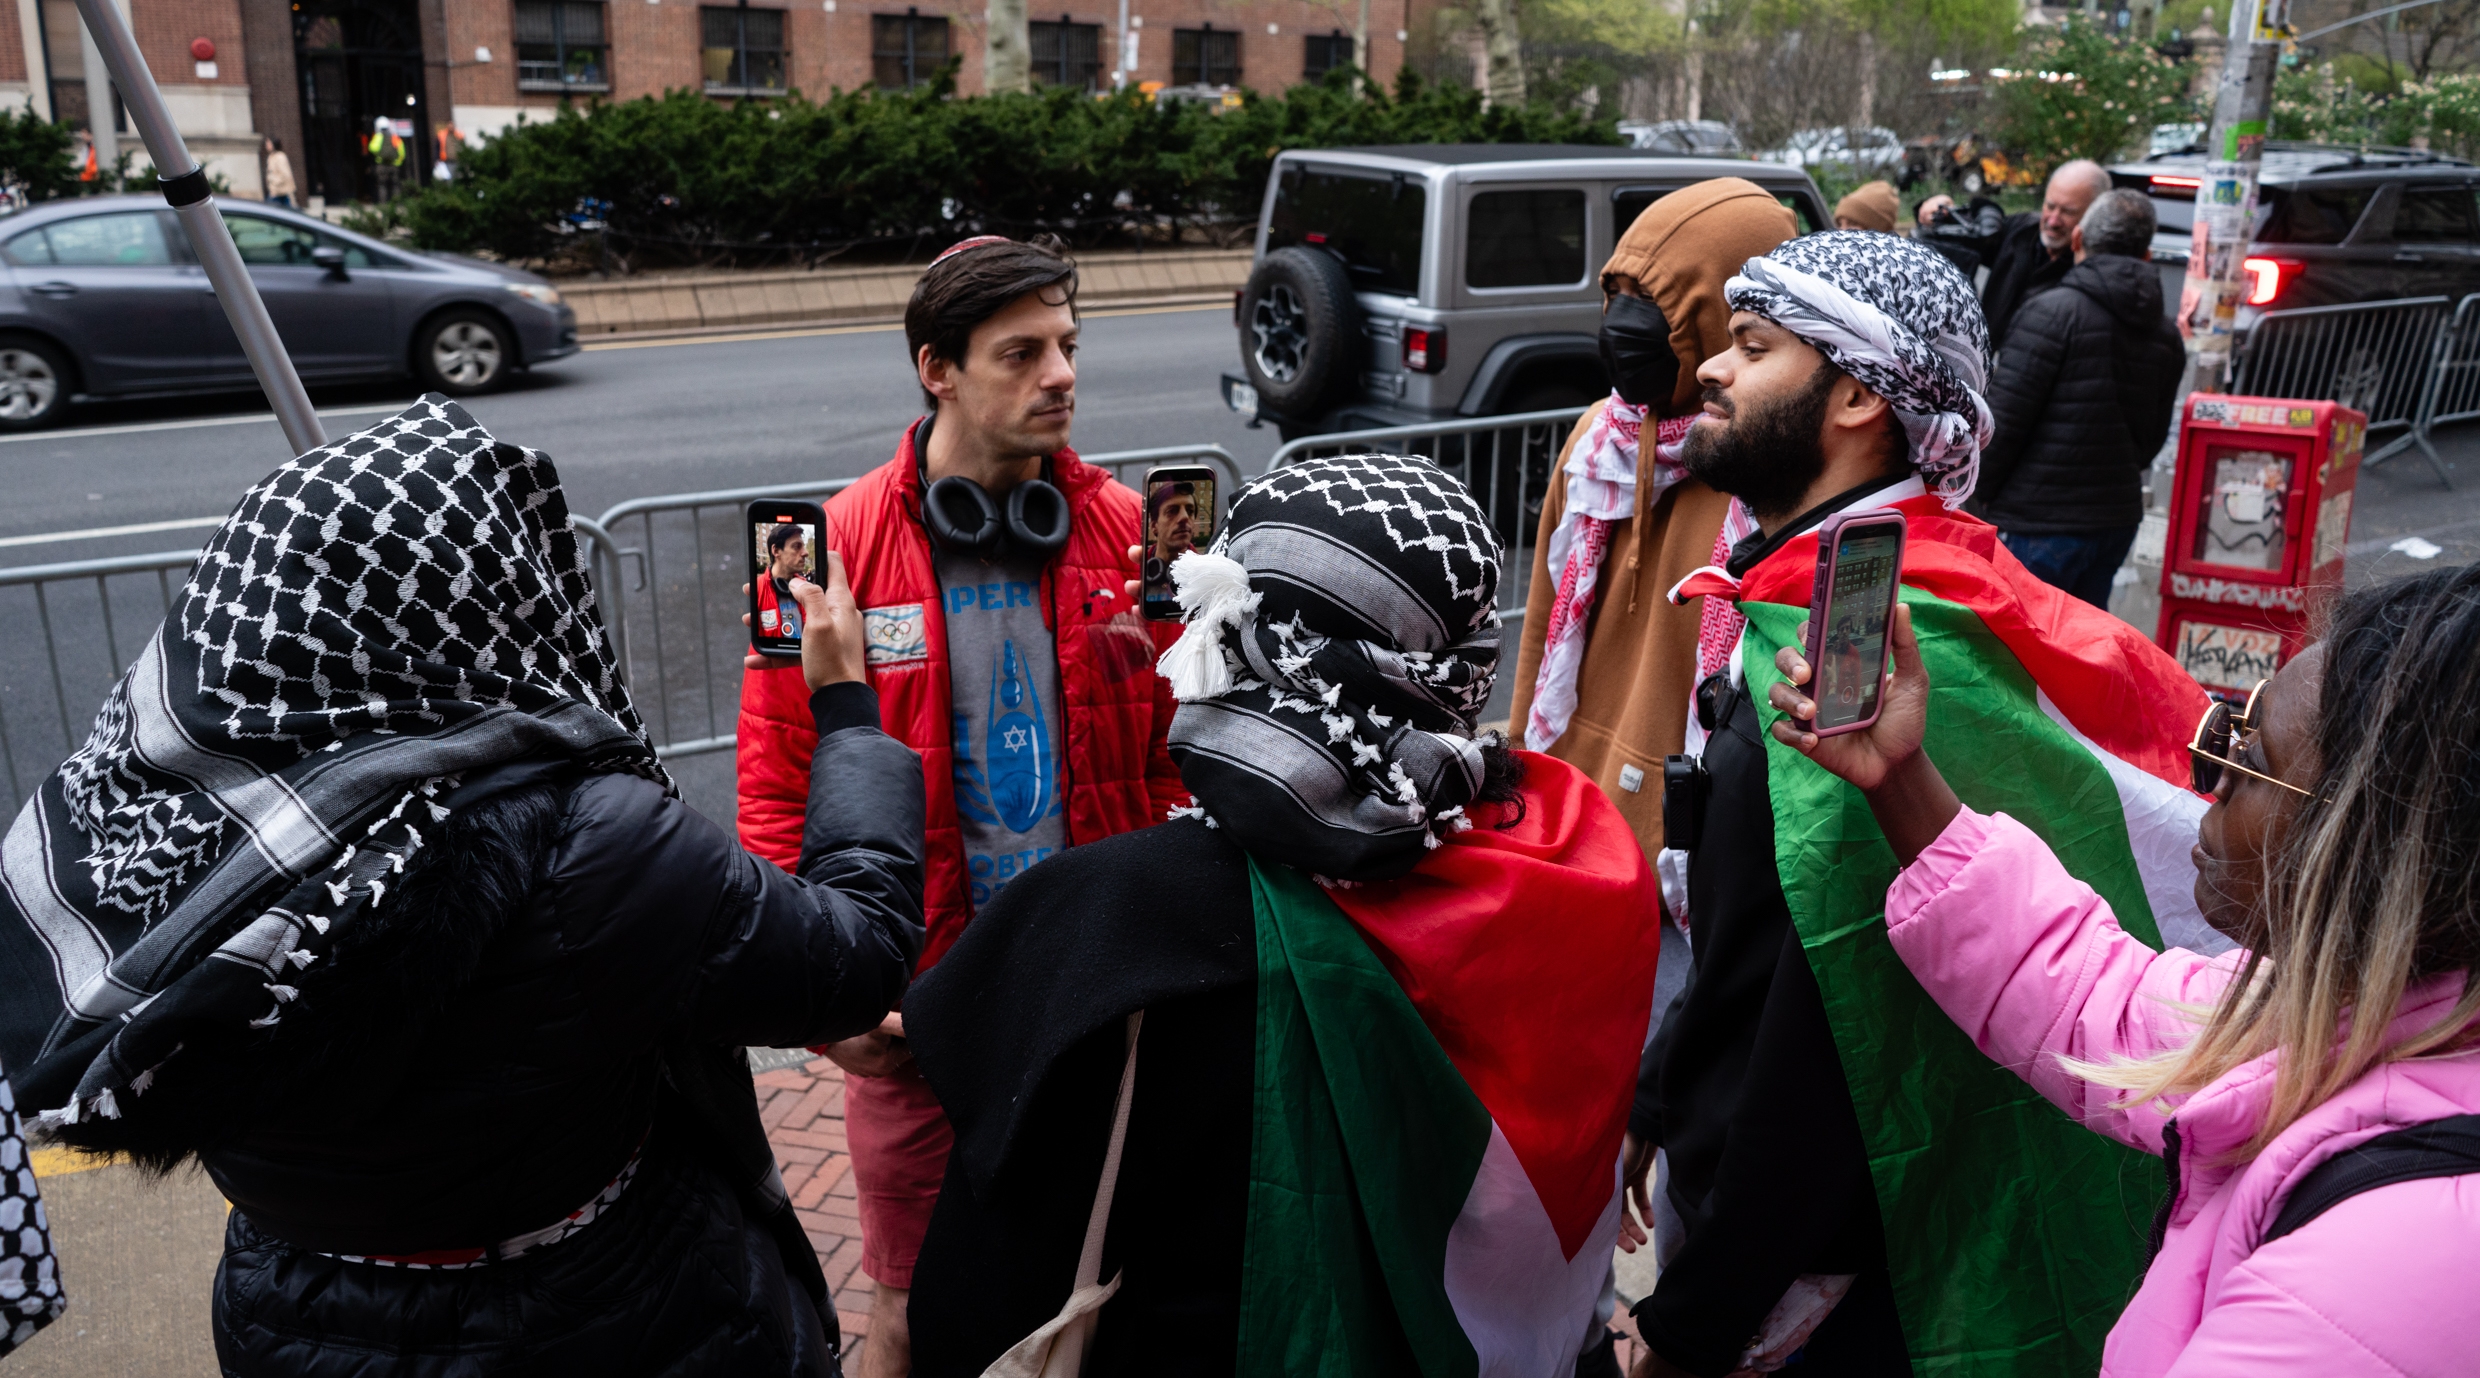 An open letter to the Columbia University Gaza war protesters from a pro-Palestinian activist in Israel